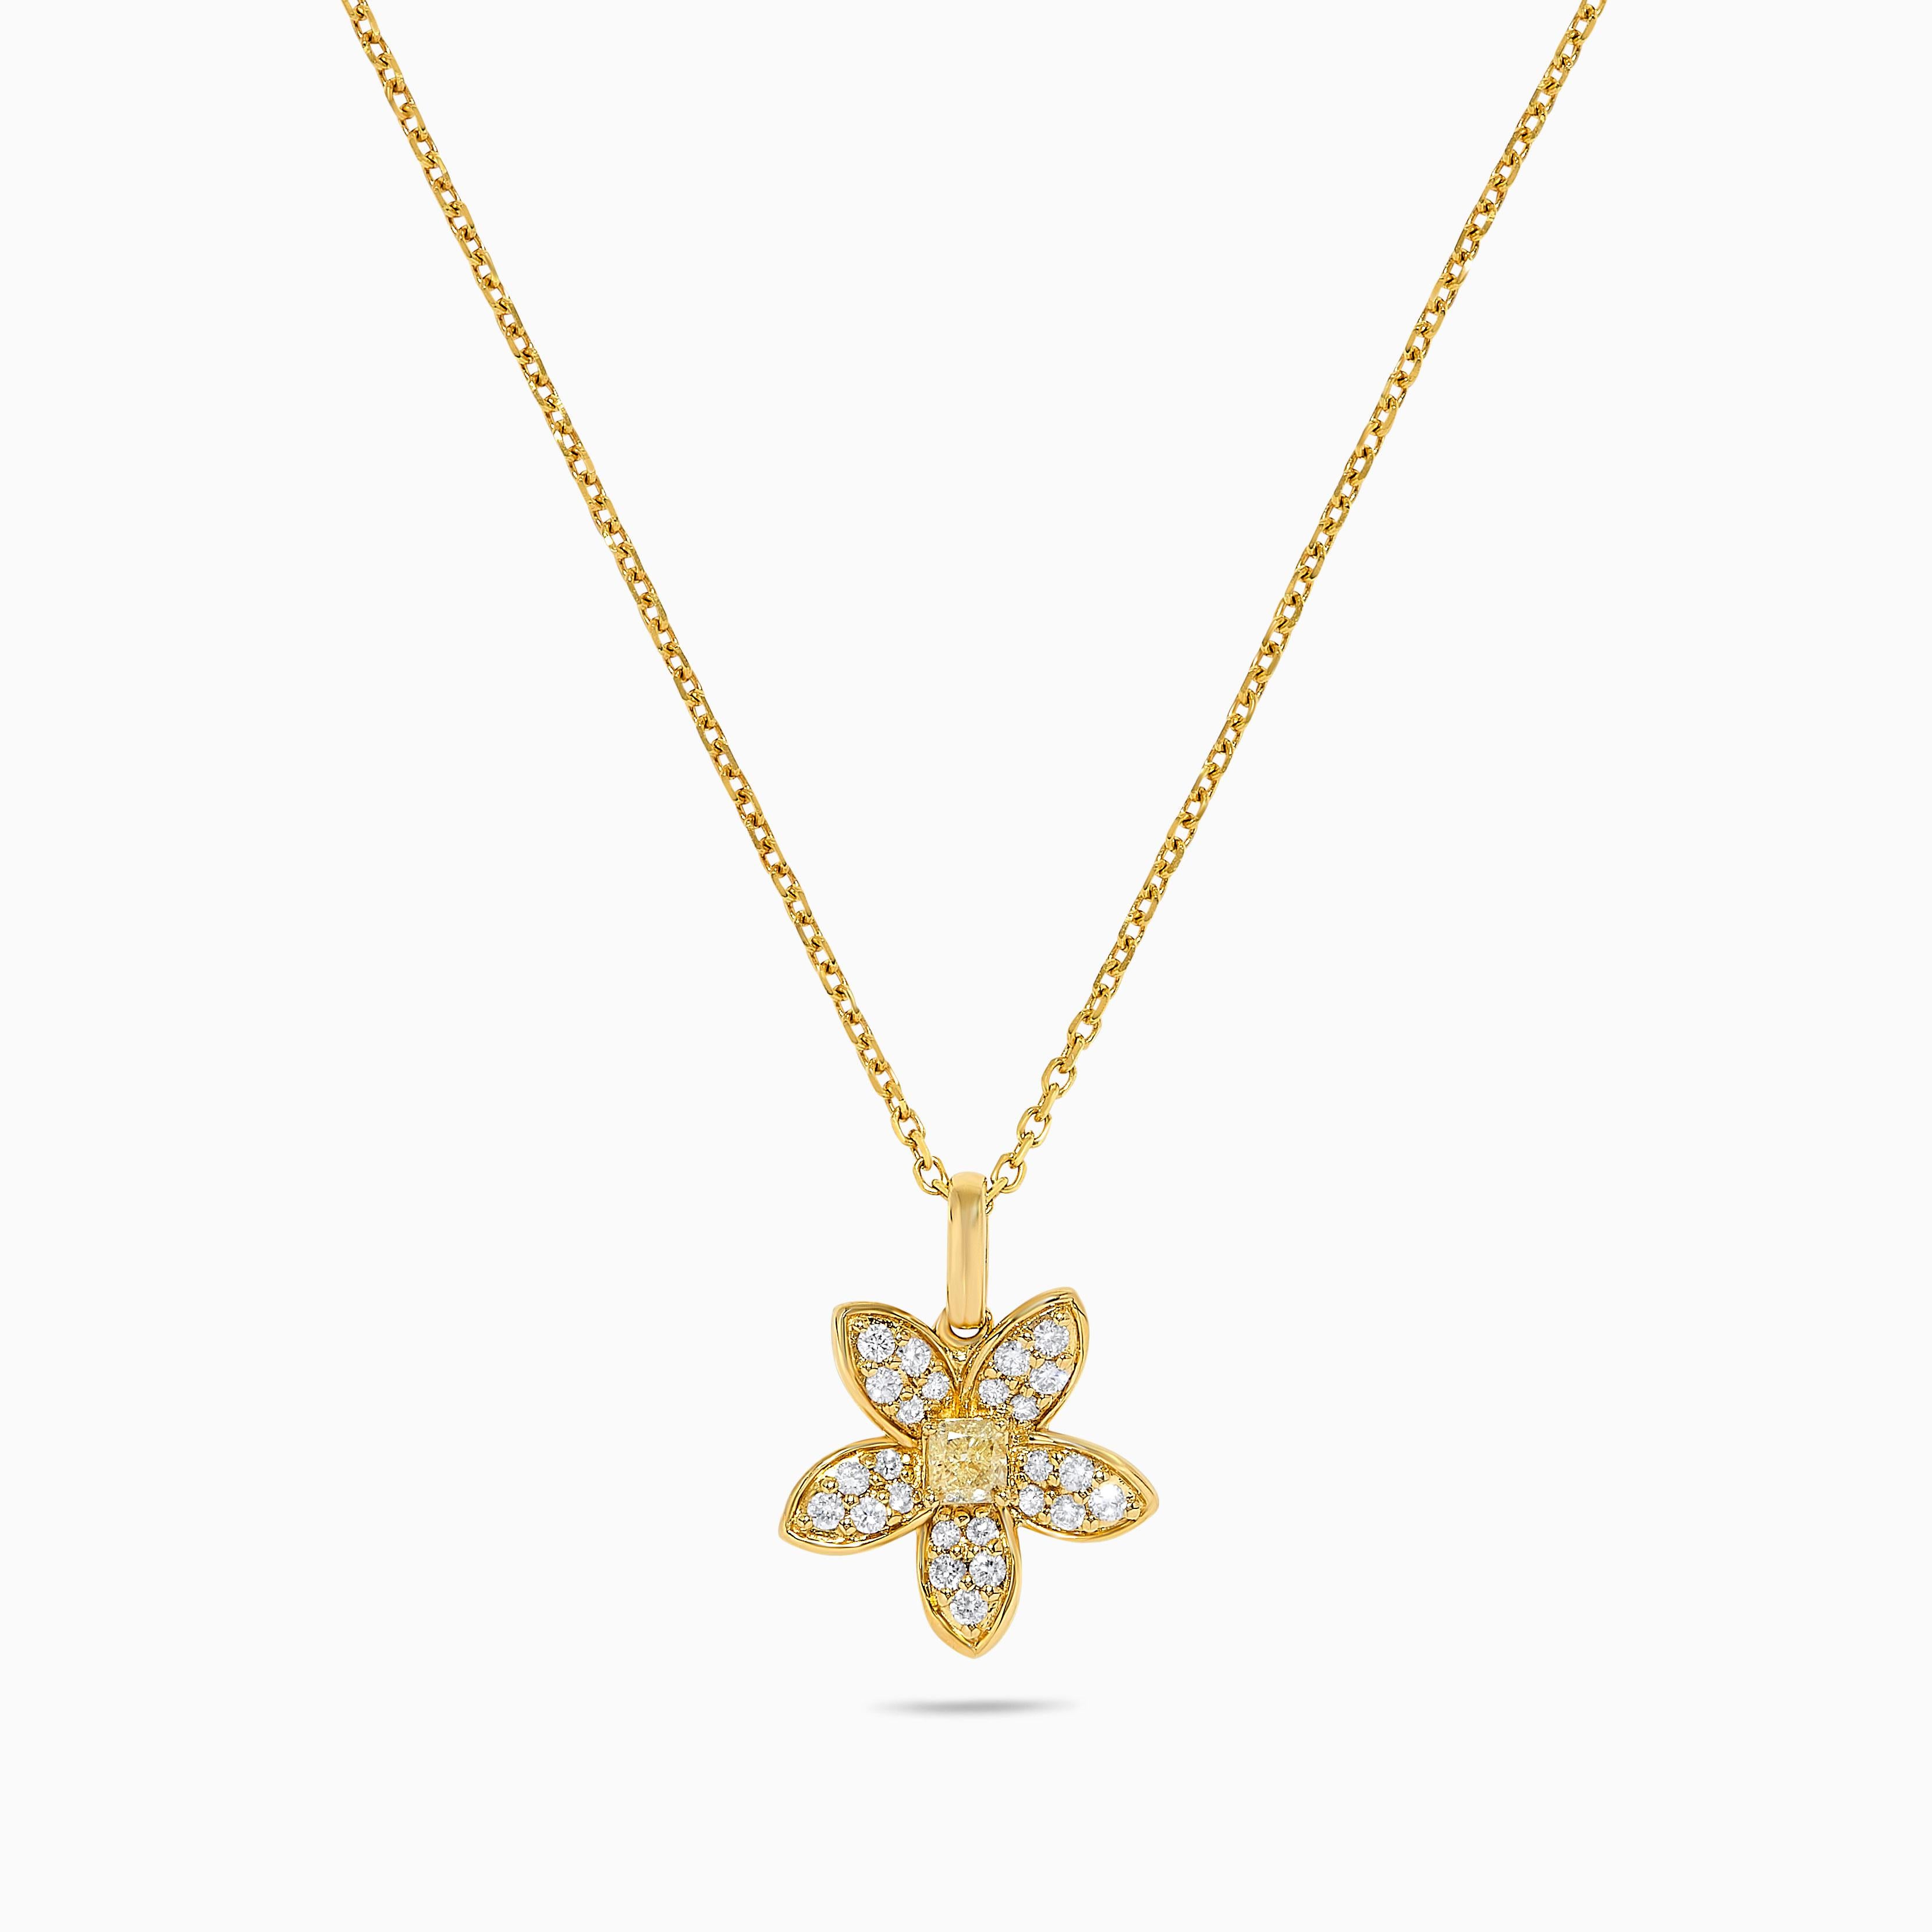 RareGemWorld's intriguing diamond pendant. Mounted in a beautiful 18K Yellow Gold setting with a natural cushion cut yellow diamond. The yellow diamond is surrounded by round natural white diamond melee. This pendant is guaranteed to impress and